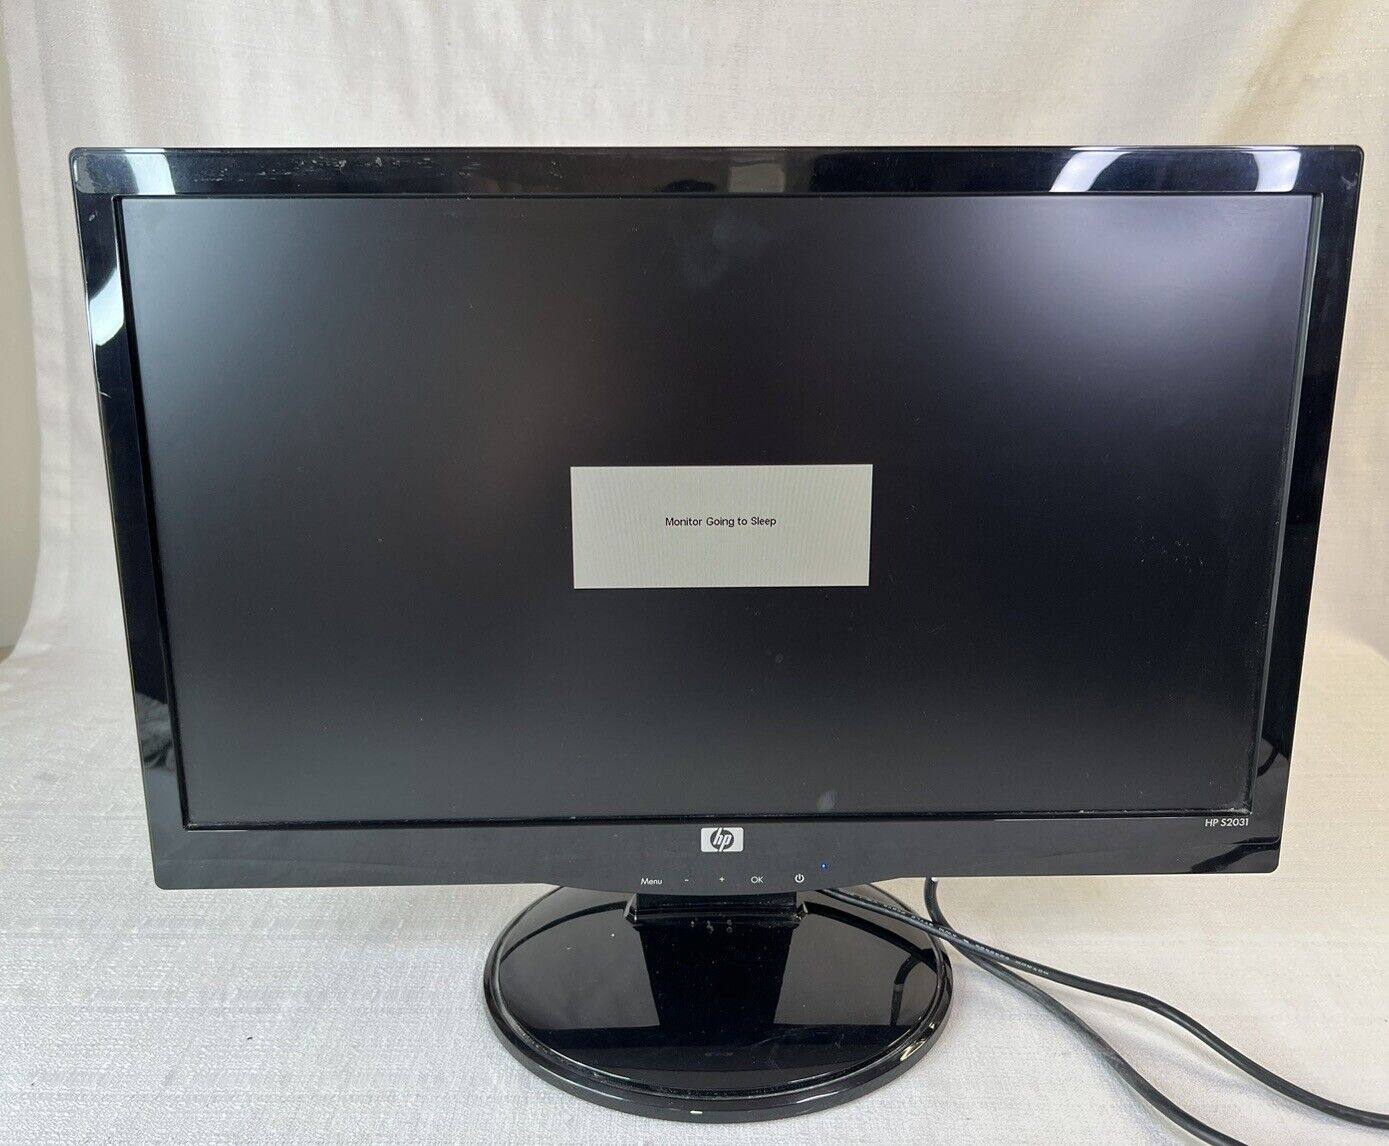 HP S2031 20-inch Widescreen LCD Desktop Computer Monitor w/ Power Cord & Cable